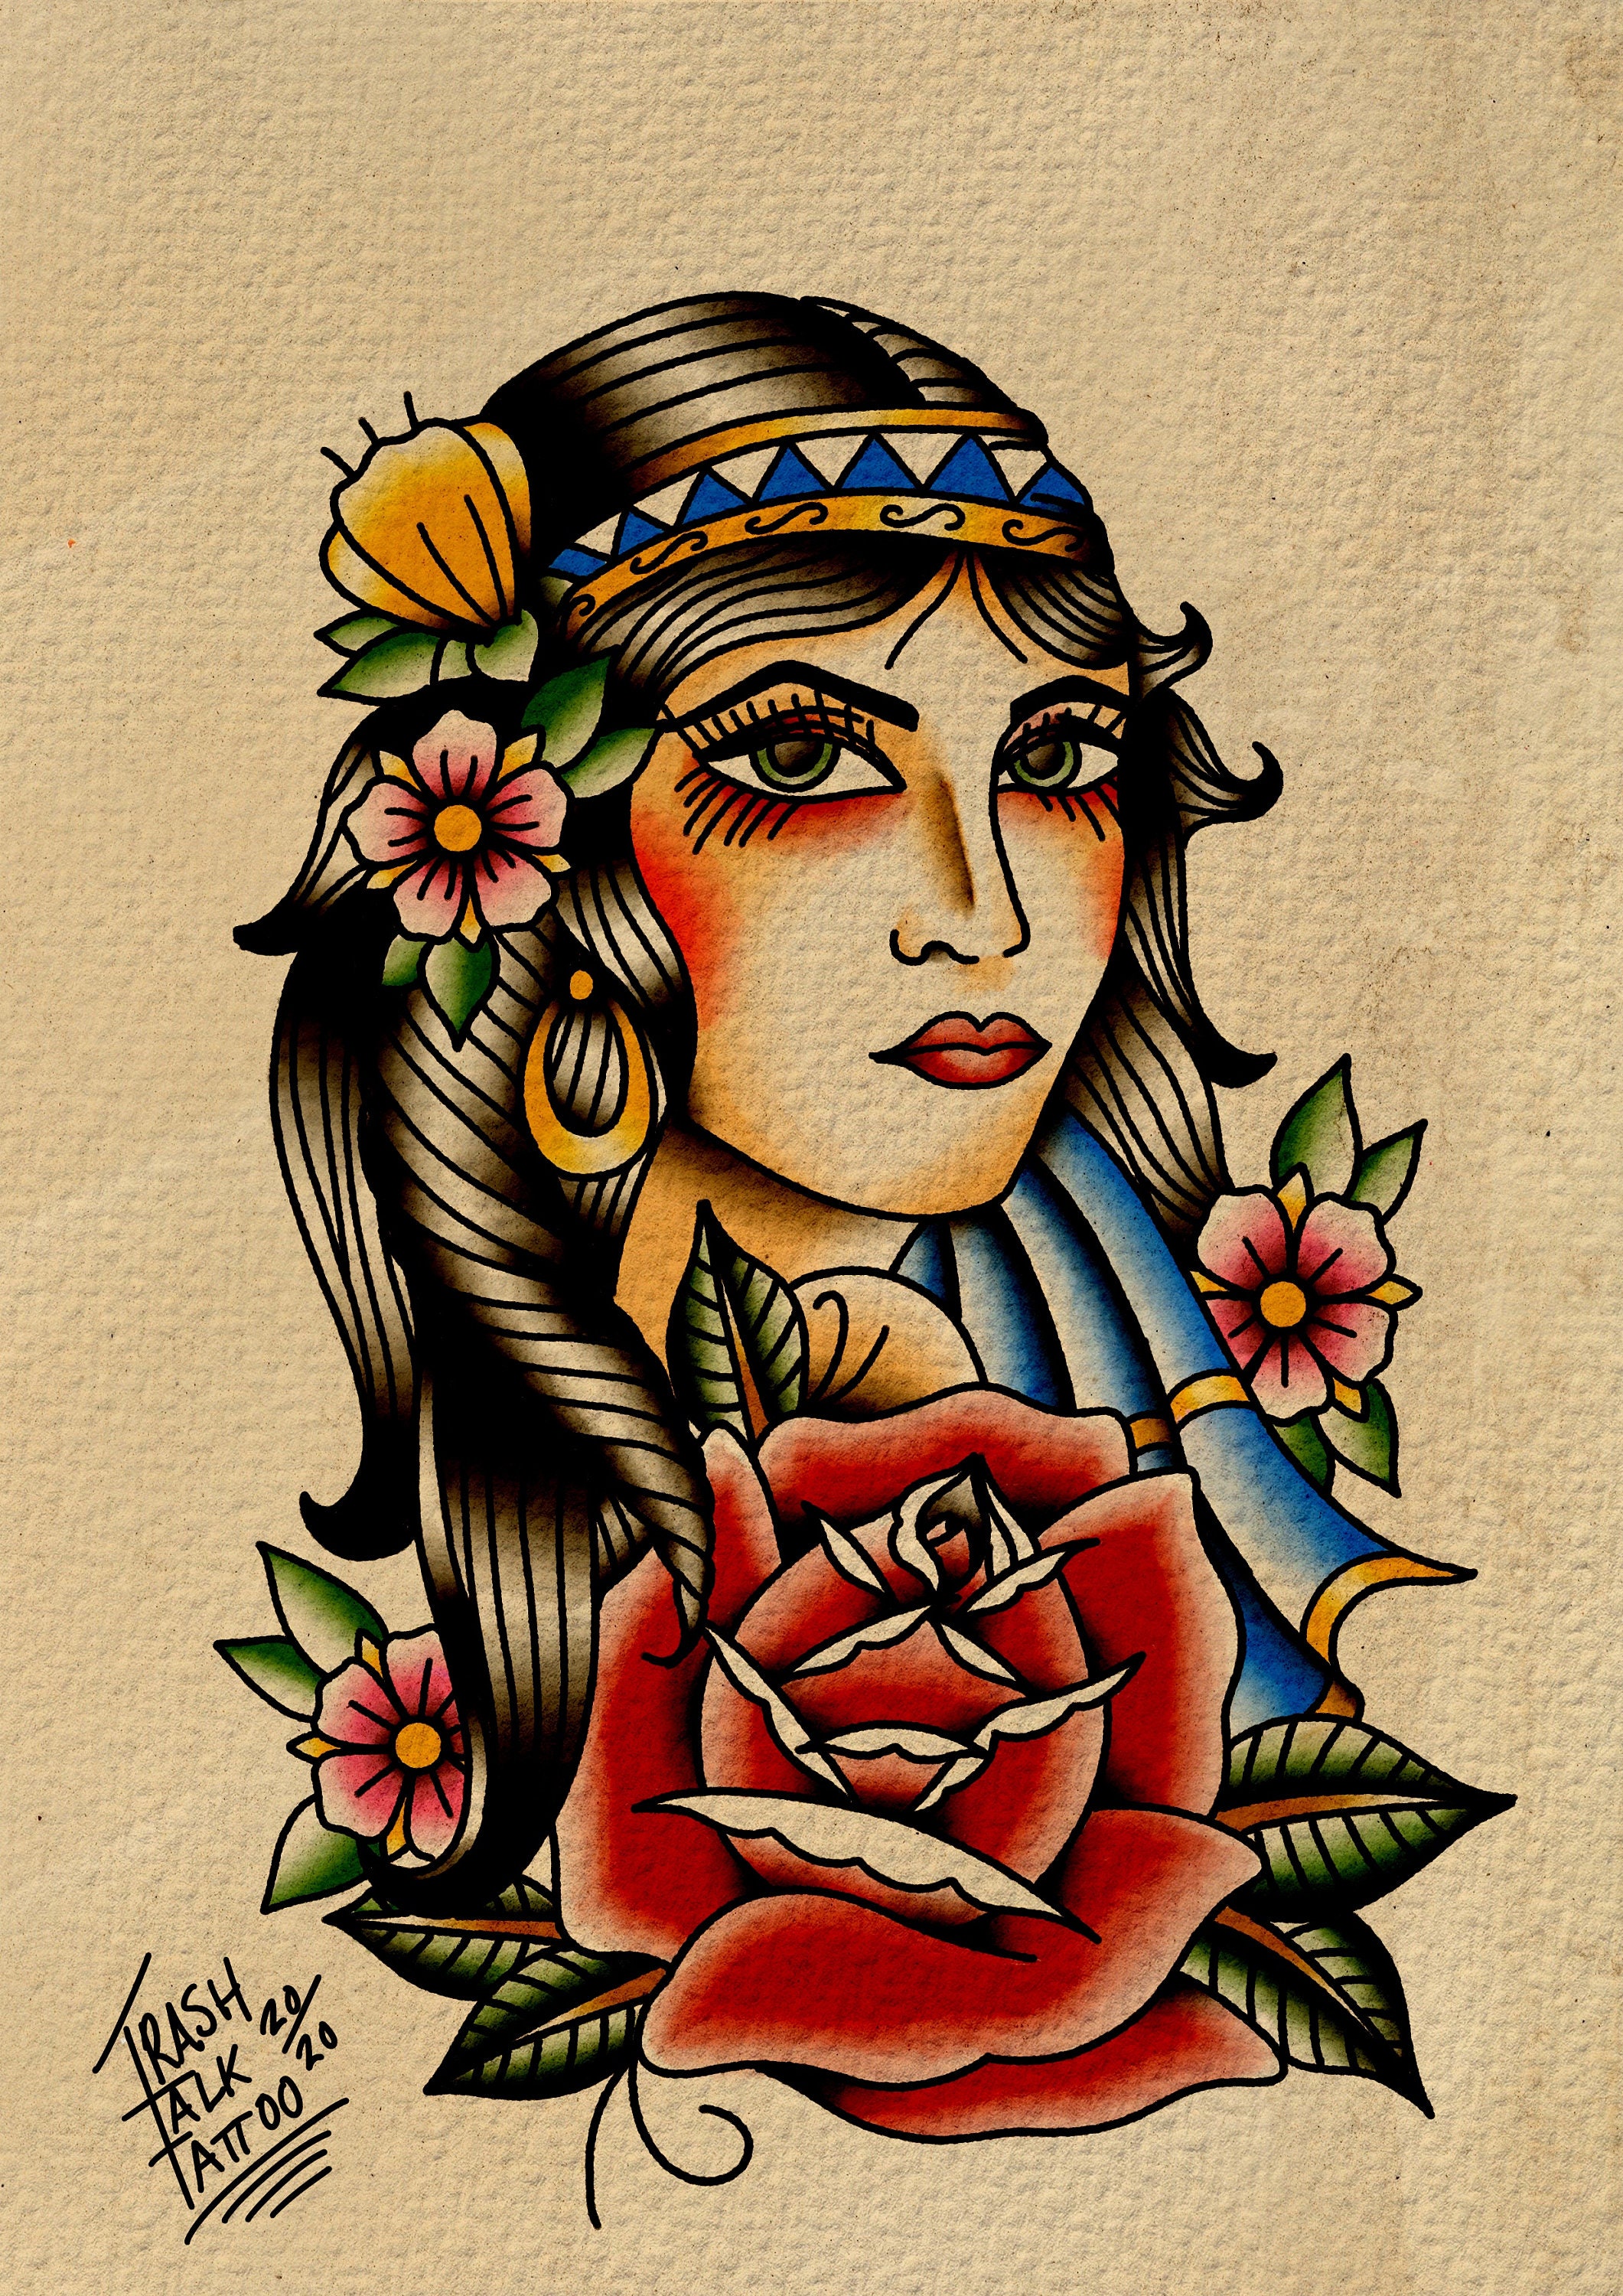 3003 Gypsy Woman Drawings Images Stock Photos  Vectors  Shutterstock